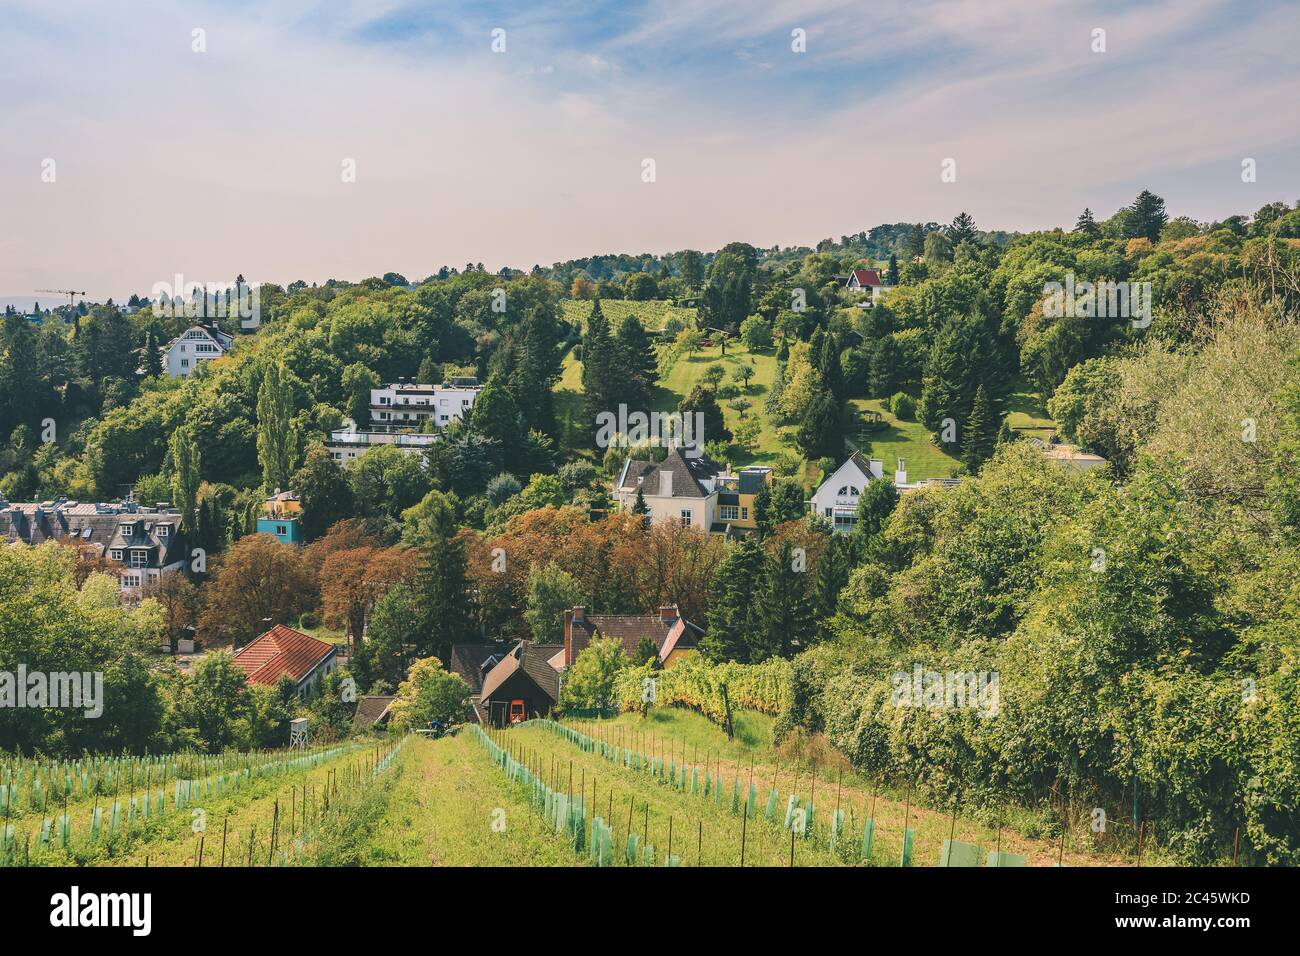 Rows of grapevines during summer period in beautiful wine-growing district in Vieanna Stock Photo